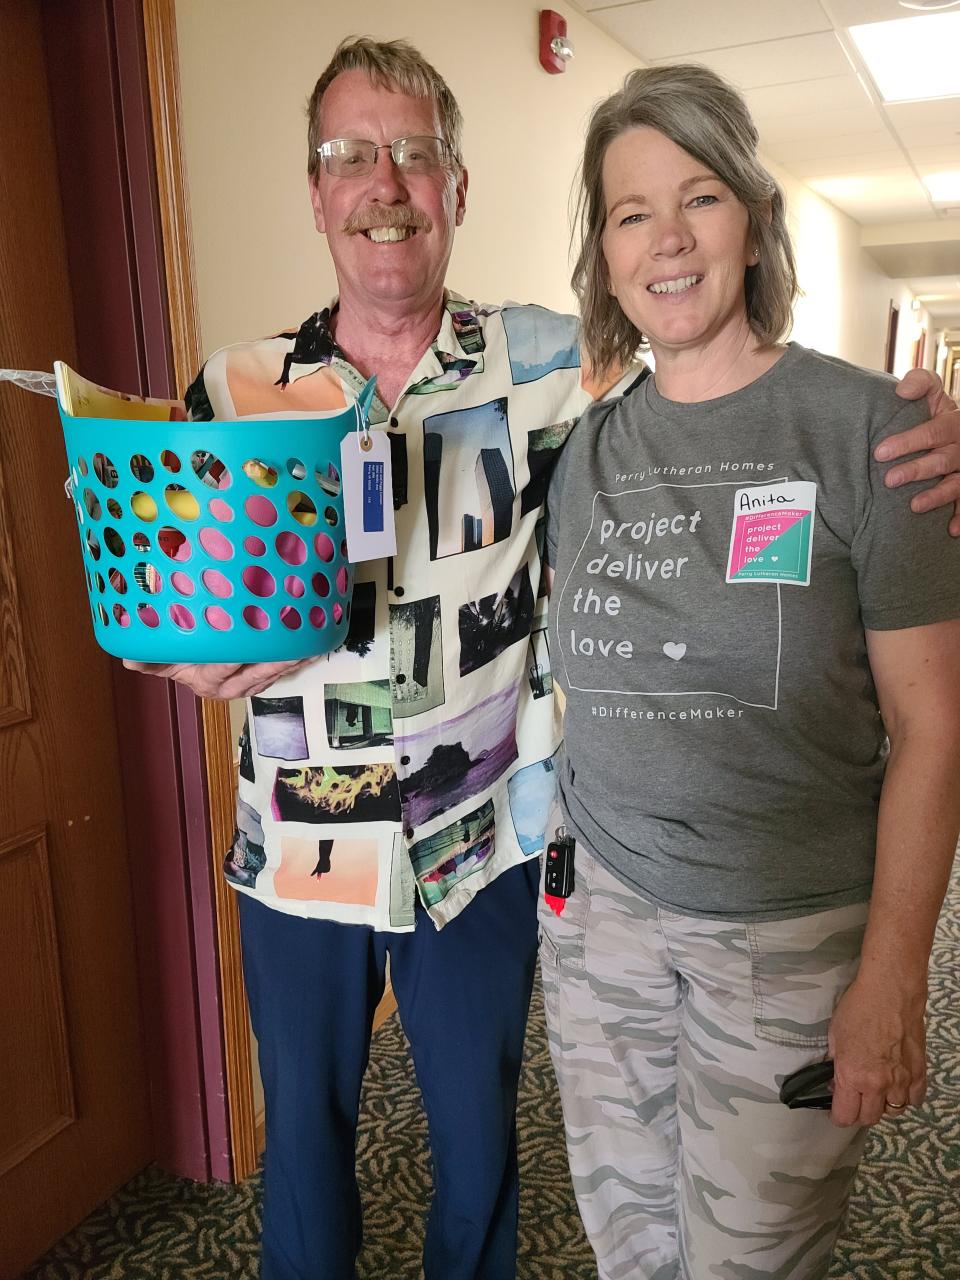 Dave Cannon poses for a photo after receiving a basket from Anita McVey, of Boone, through the Perry Lutheran Homes' Project Deliver the LOVE initiative on Thursday, May 11, 2023.